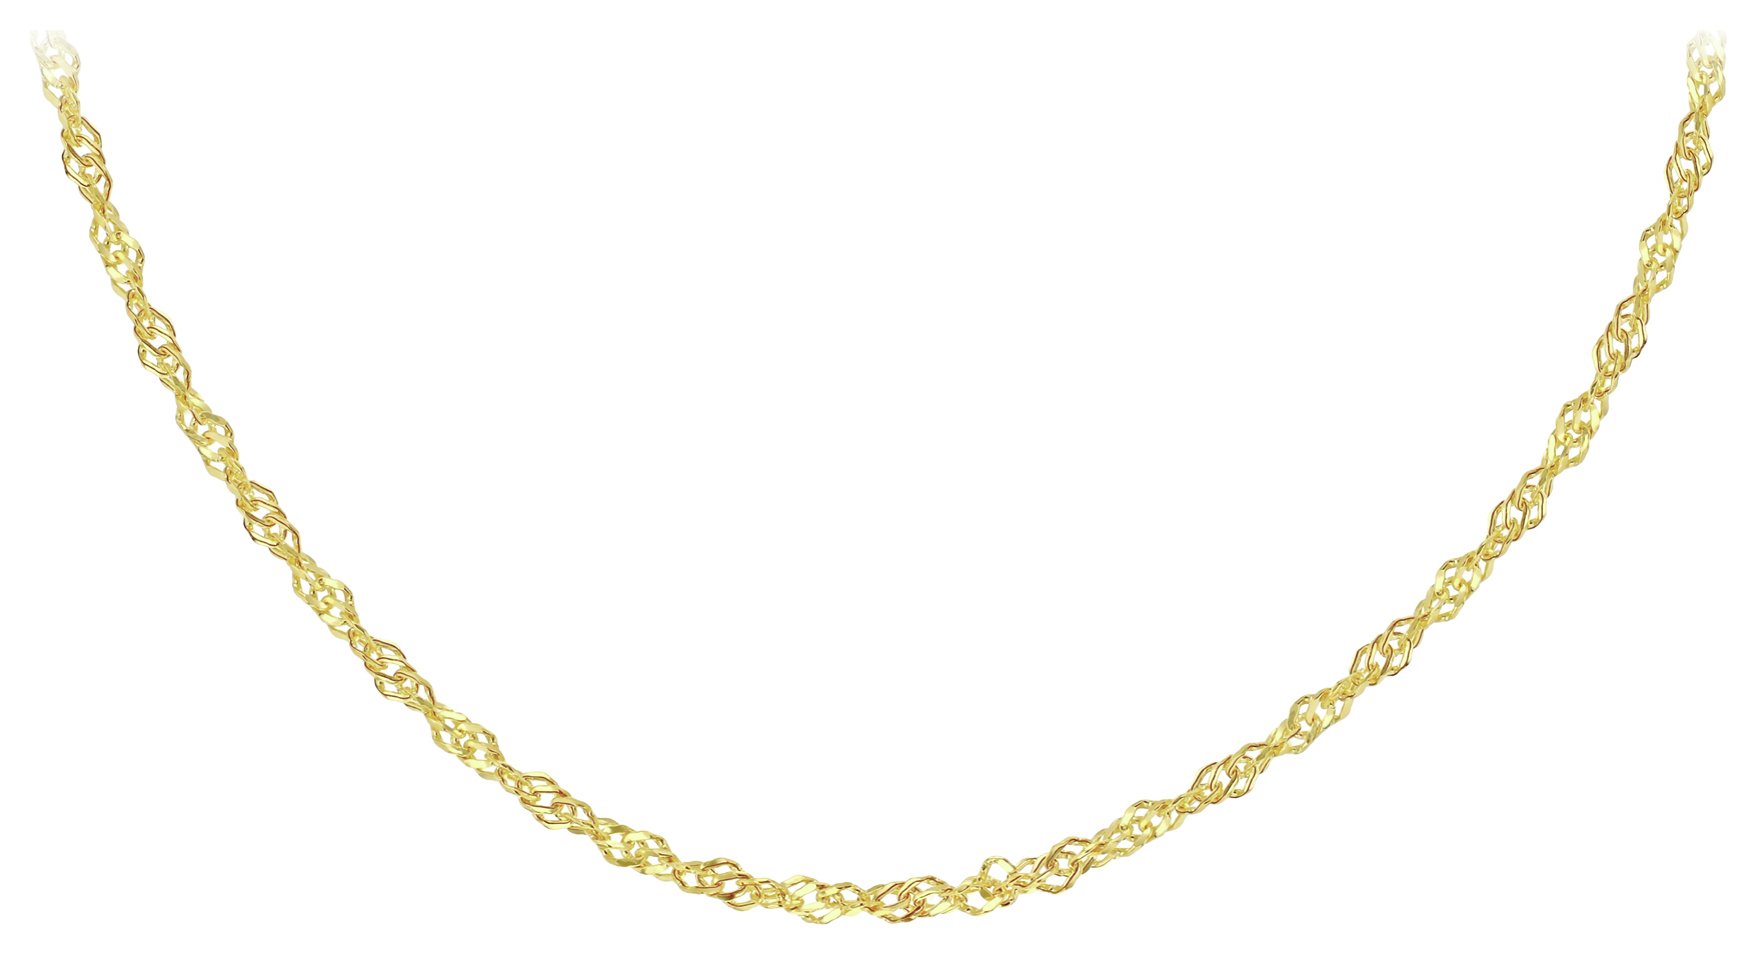 Revere 9ct Gold Twisted Curb 18 Inch Necklace